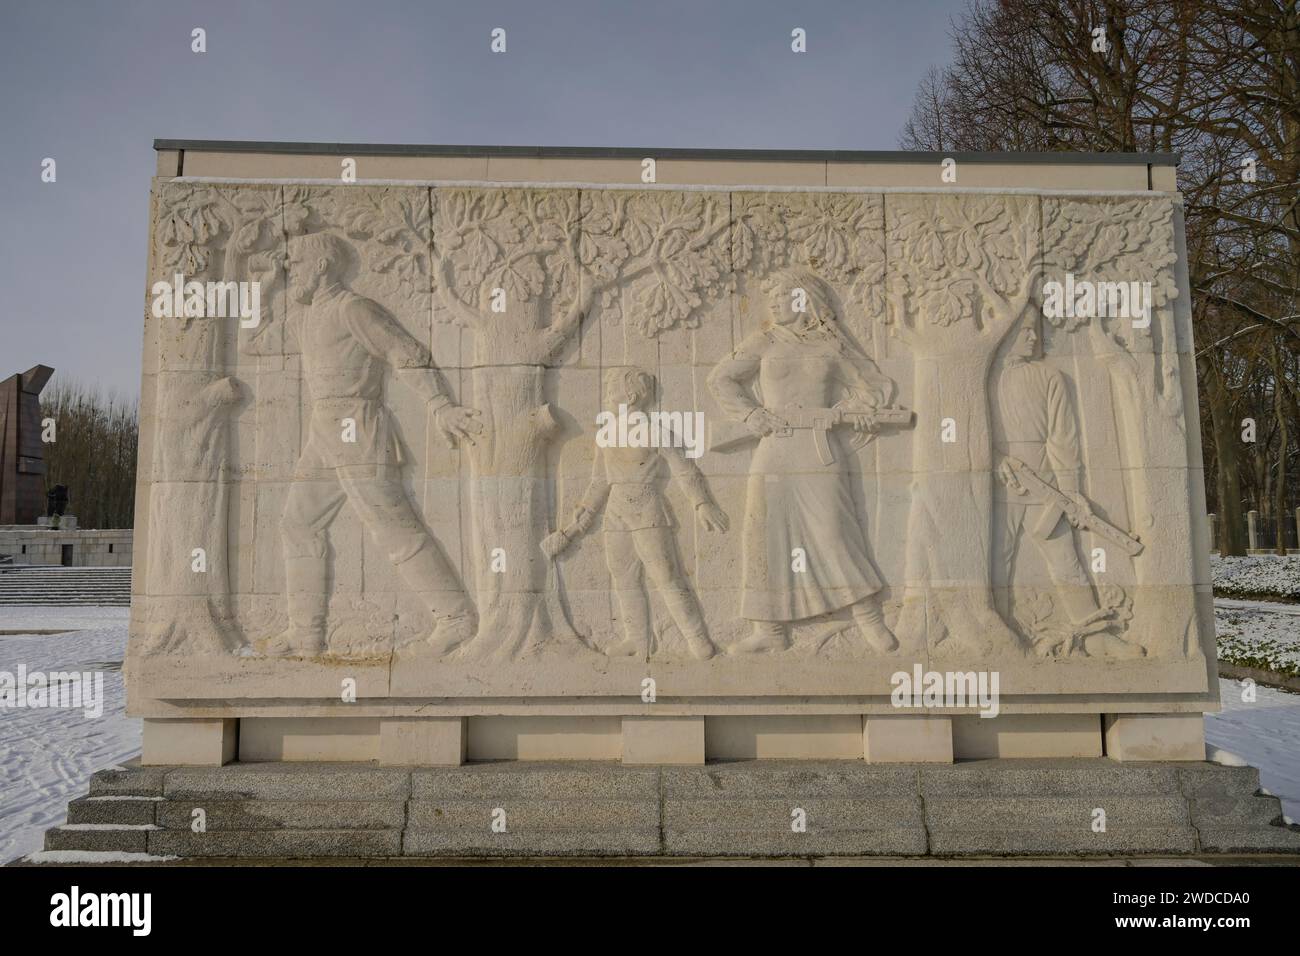 Sarcophagus with stone relief, Theme: Destruction and Suffering in the Soviet Union, Soviet Memorial, Winter, Treptower Park, Treptow Stock Photo